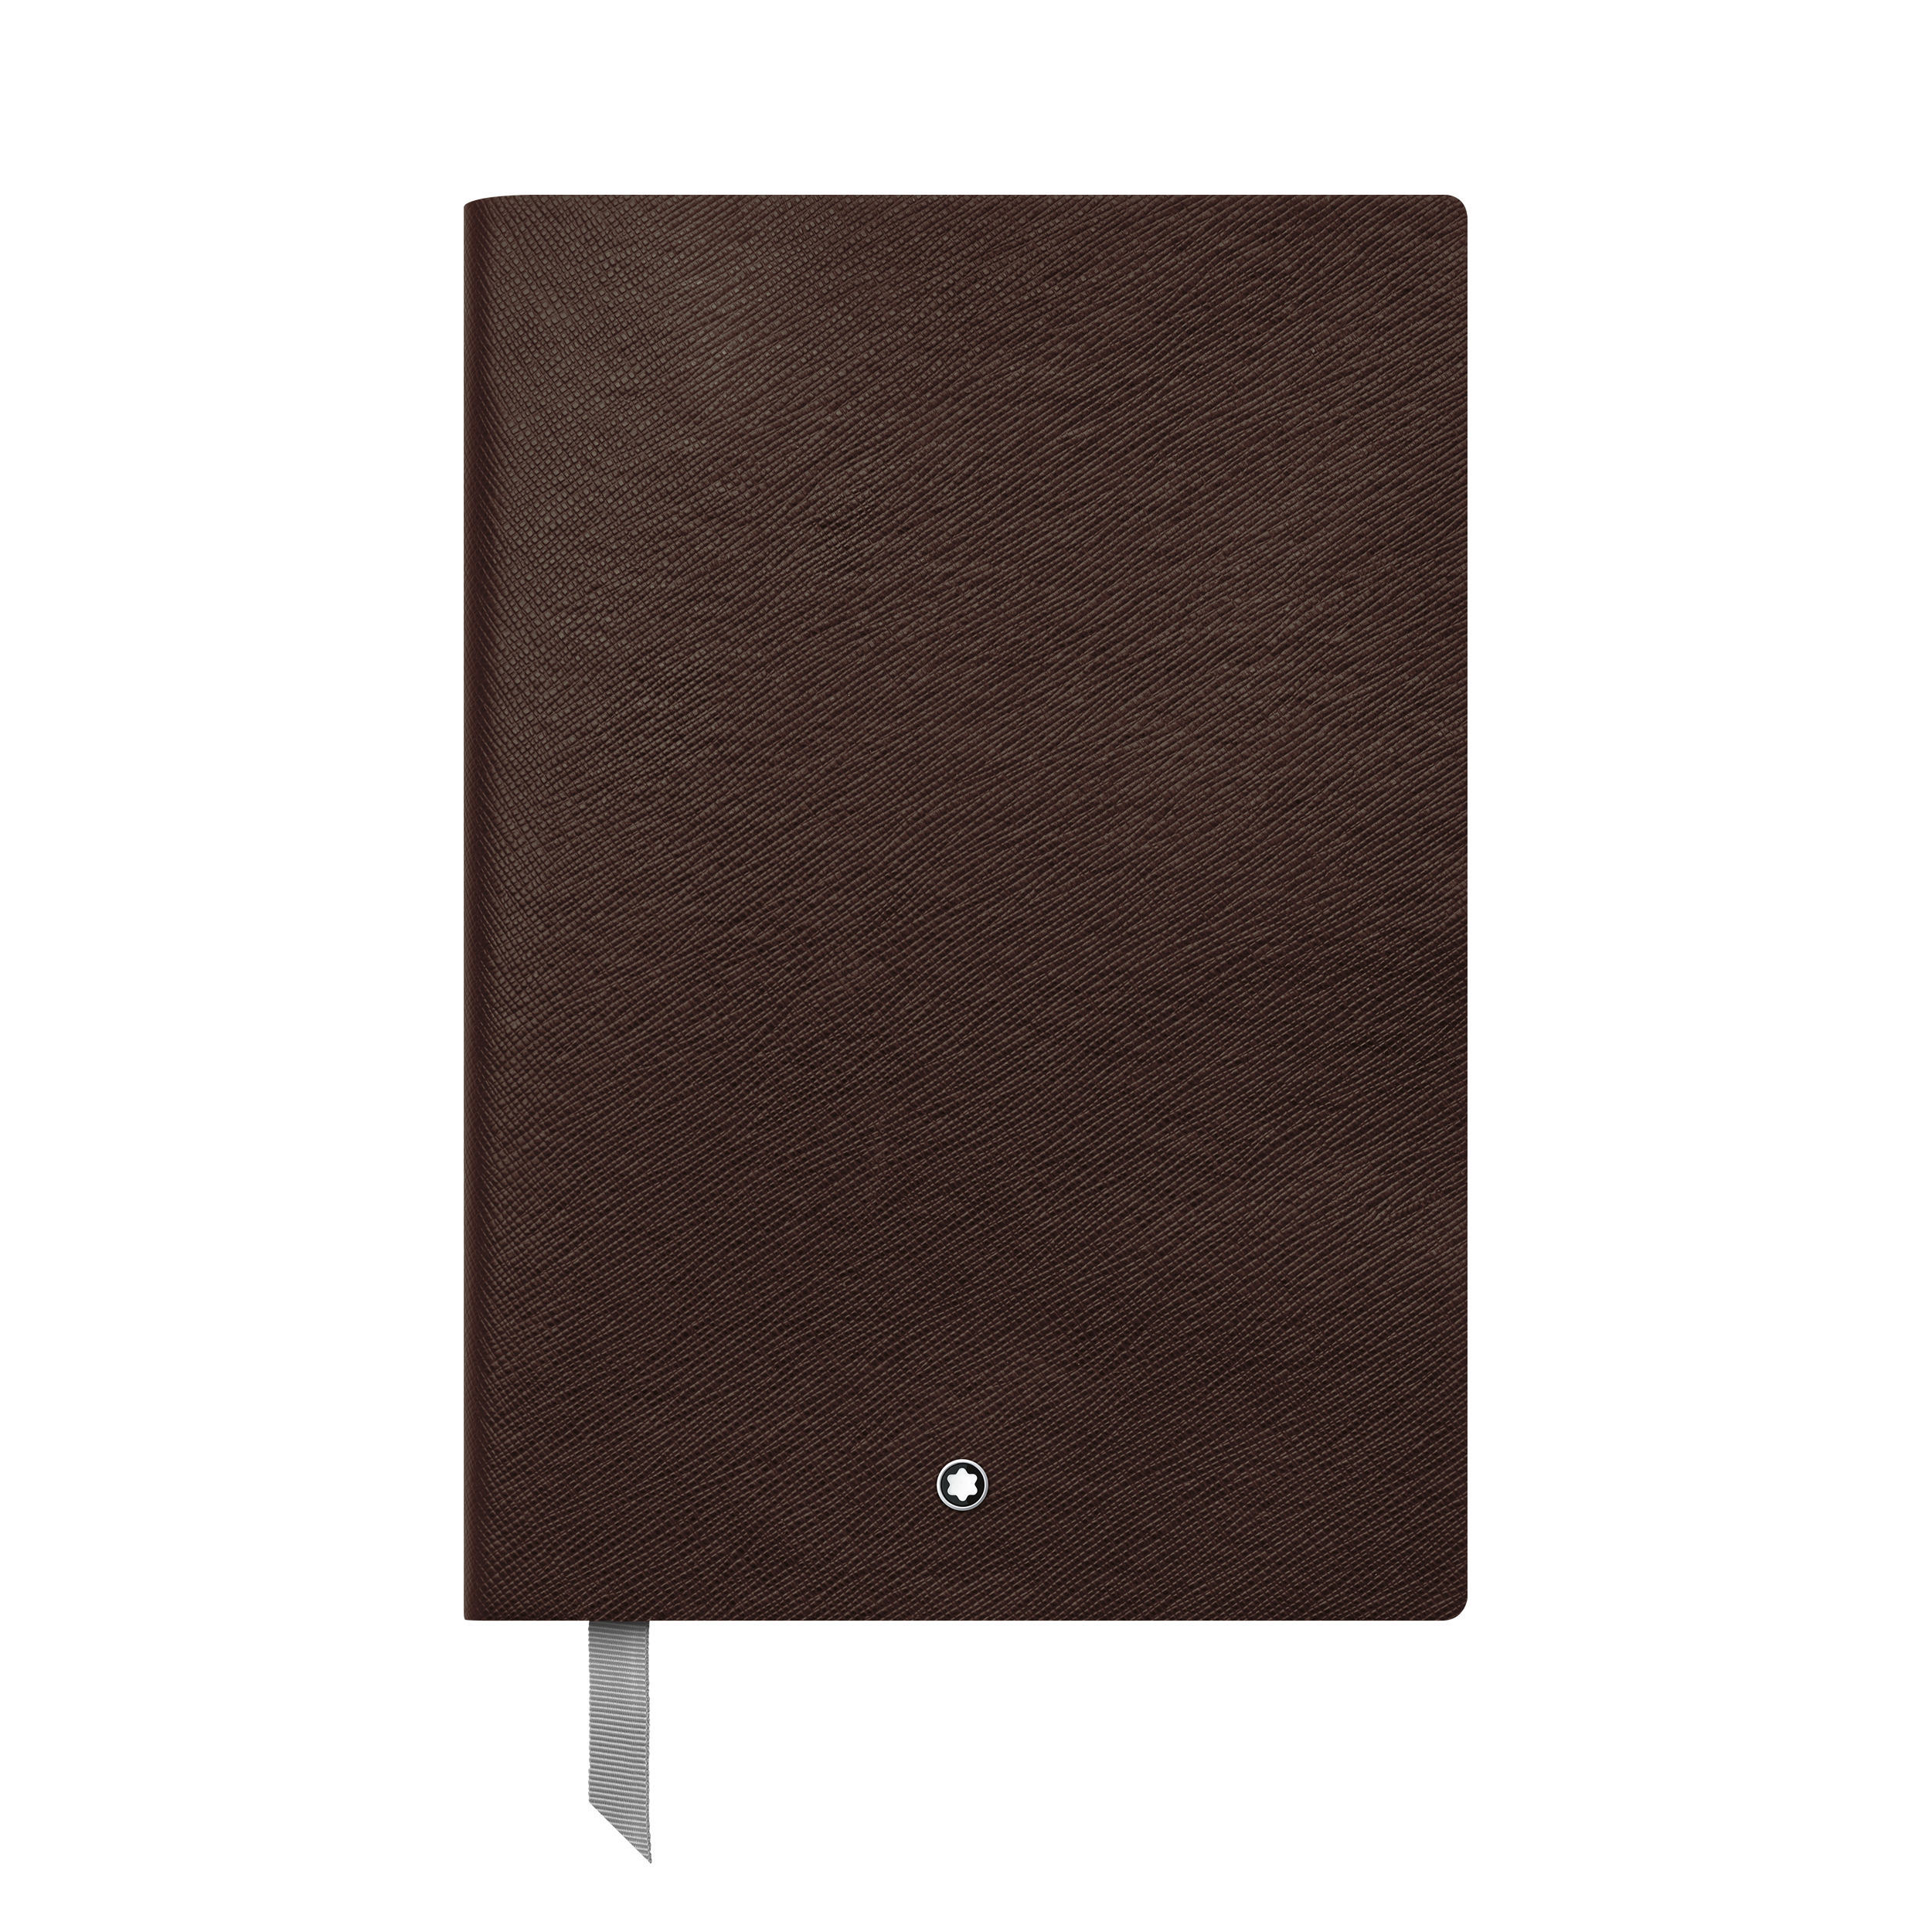 Montblanc Fine Stationery Notebook #146 Tobacco, lined, image 1